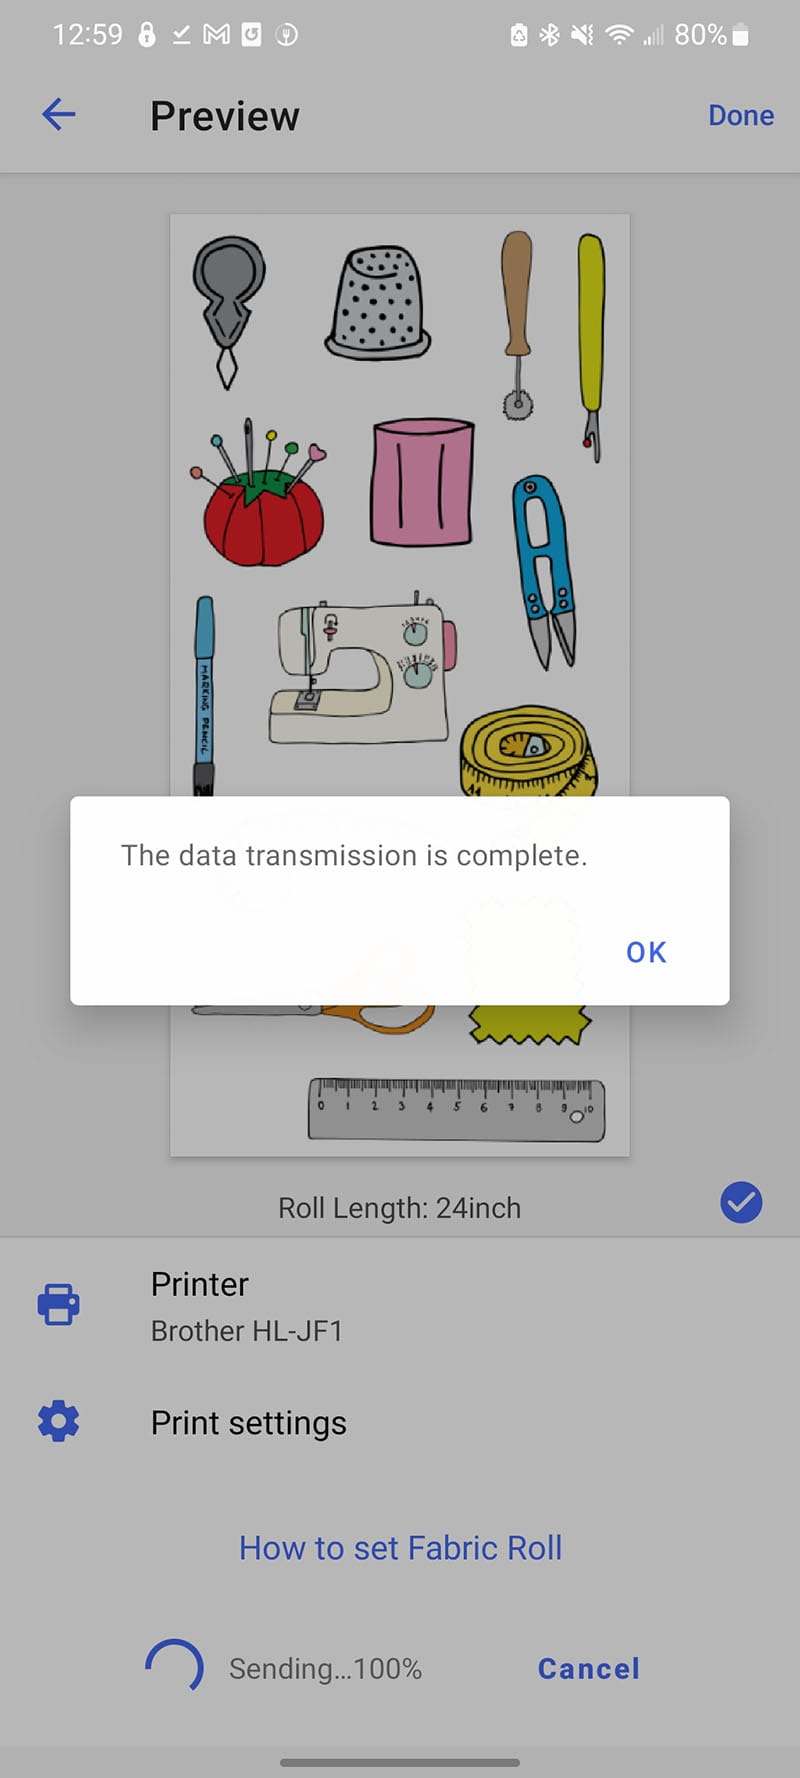 Artspira app view showing a message that data transmission is complete